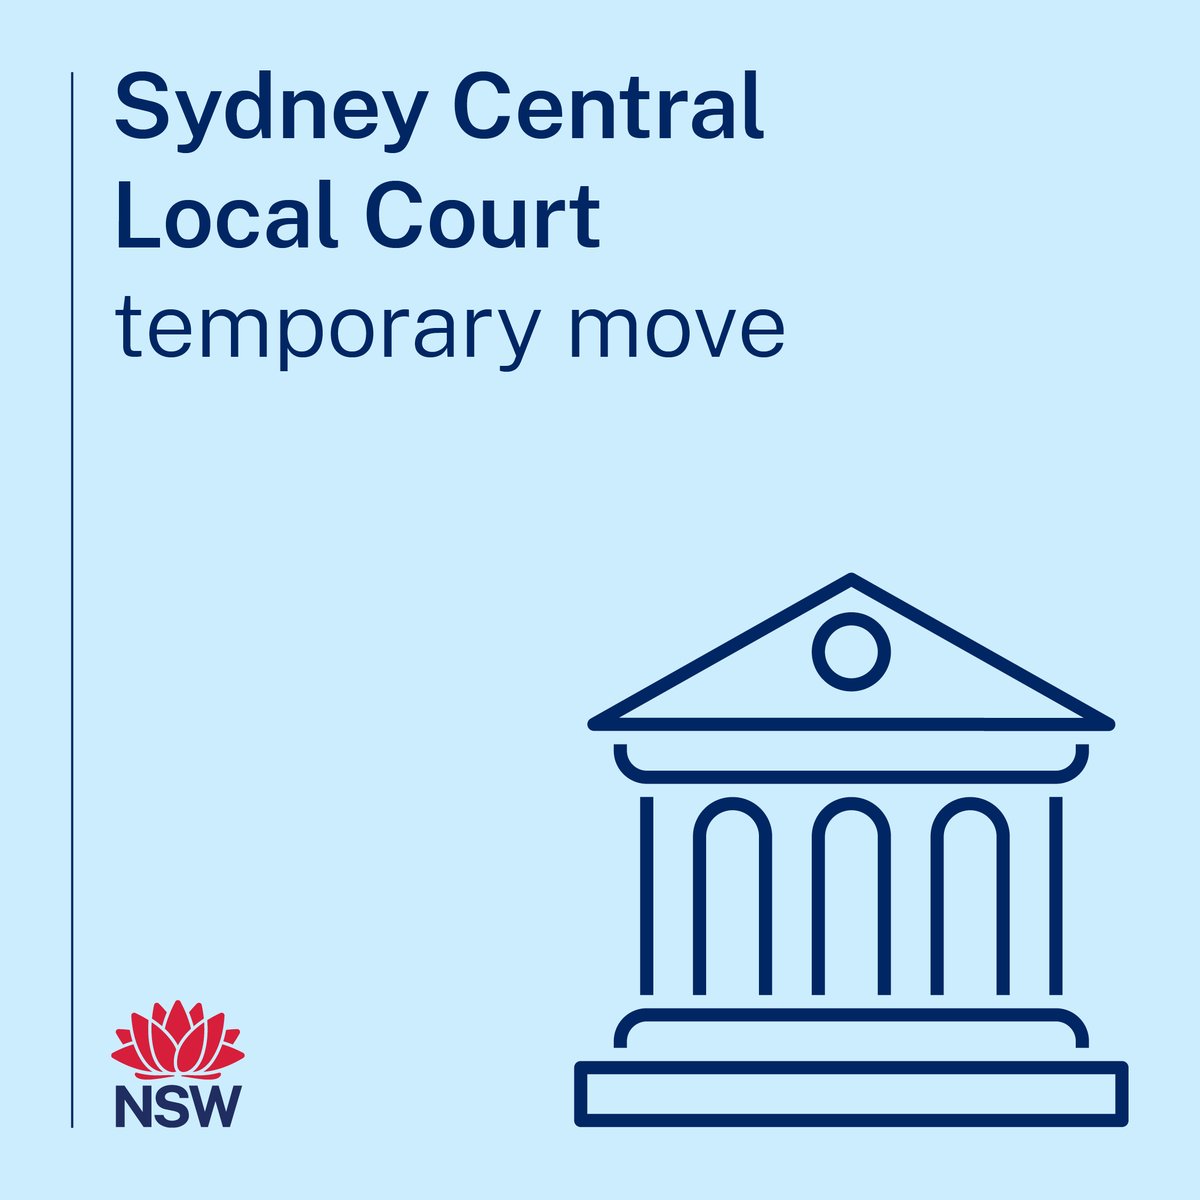 From today, all listings for Central Local Court at 98 Liverpool St, Sydney, have been transferred to the Downing Centre Local Court at 143-147 Liverpool St, Sydney. All Central Local Court Registry Services will be provided at the Downing Centre Local Court Registry on Level 4.